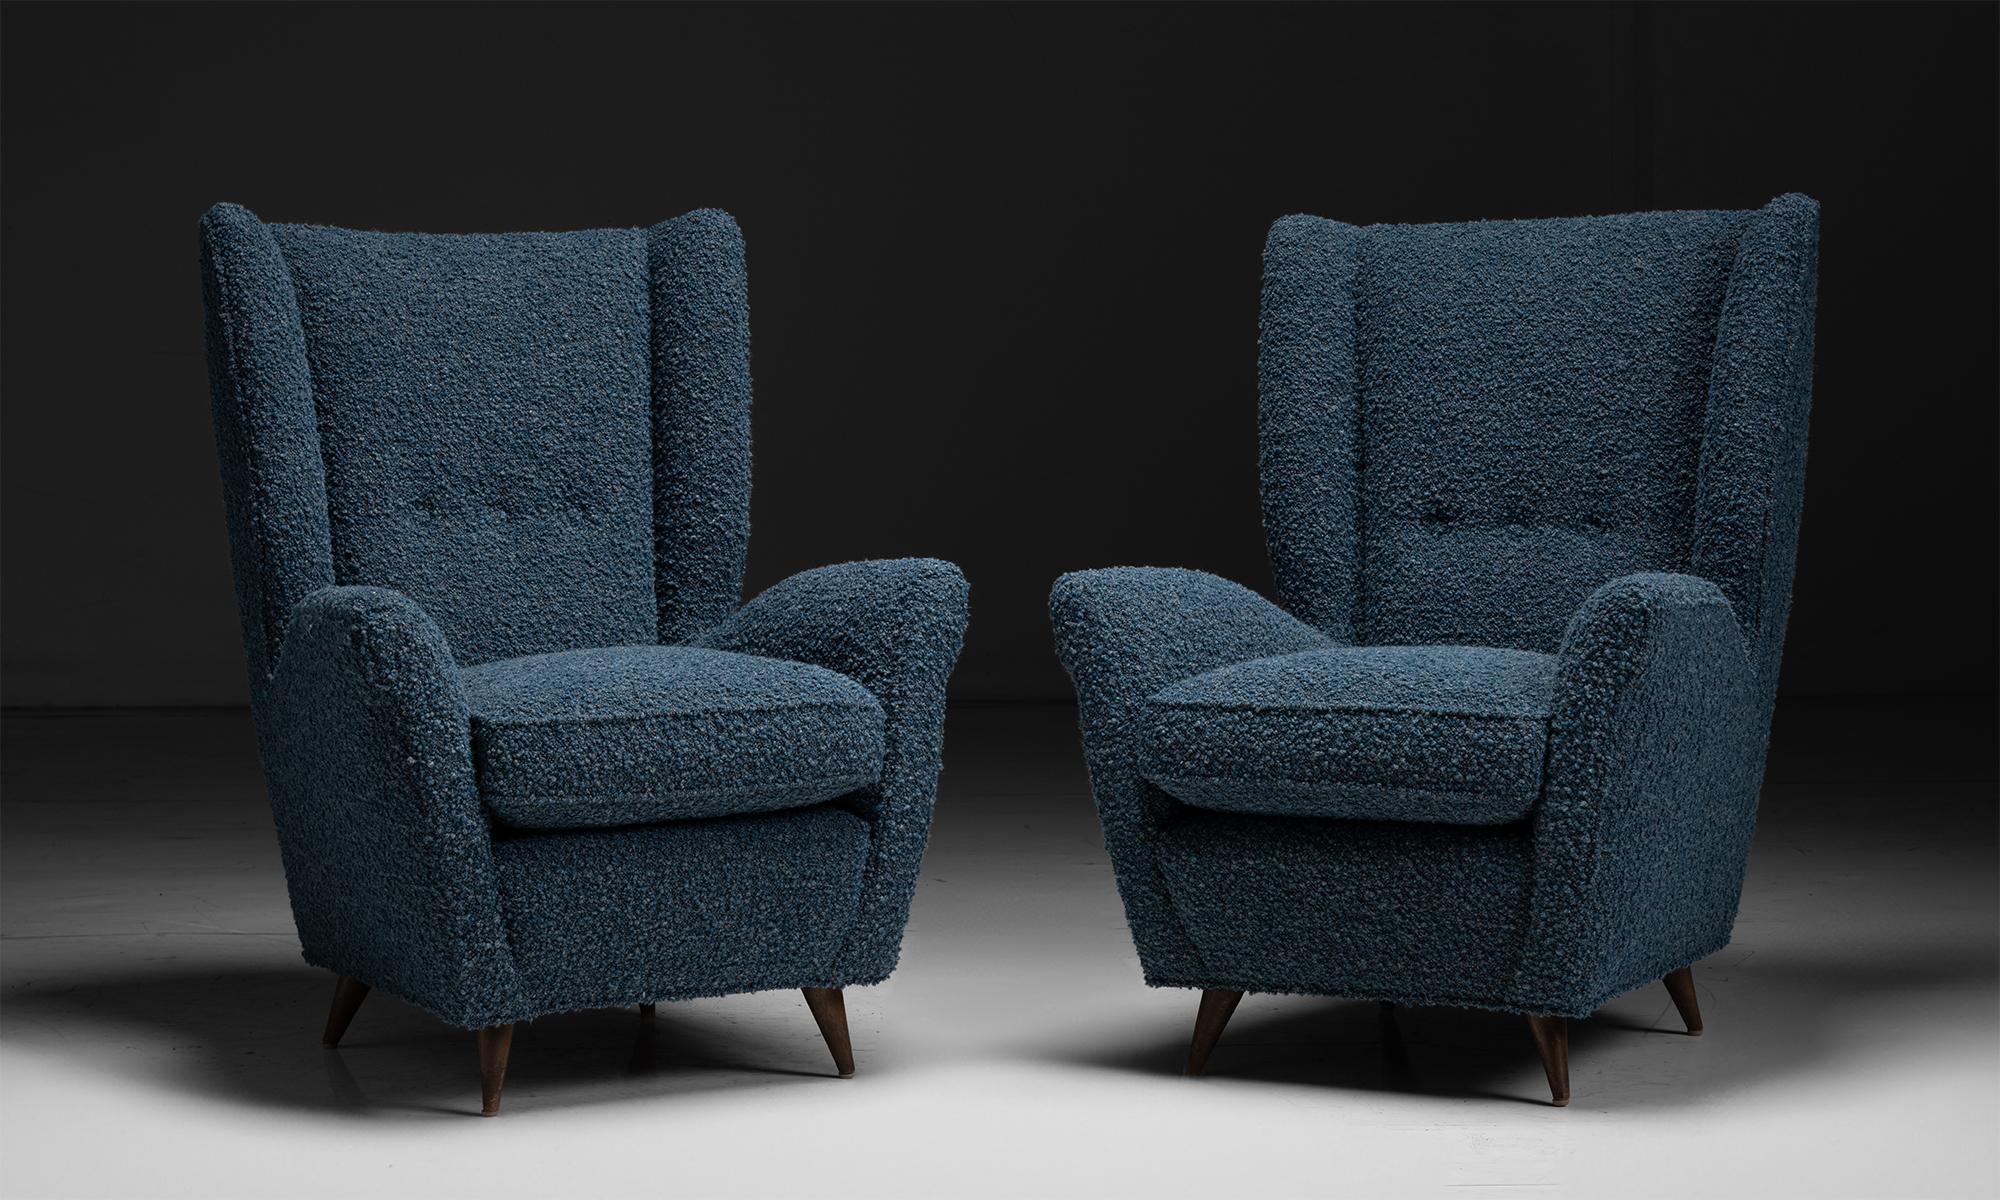 Pair of Gio Ponti Armchairs

Italy circa 1950

Vintage frame, newly upholstered in Blue Wool / Cotton Blend from BDDW.

30”w x 34”d x 40”h x 18”seat